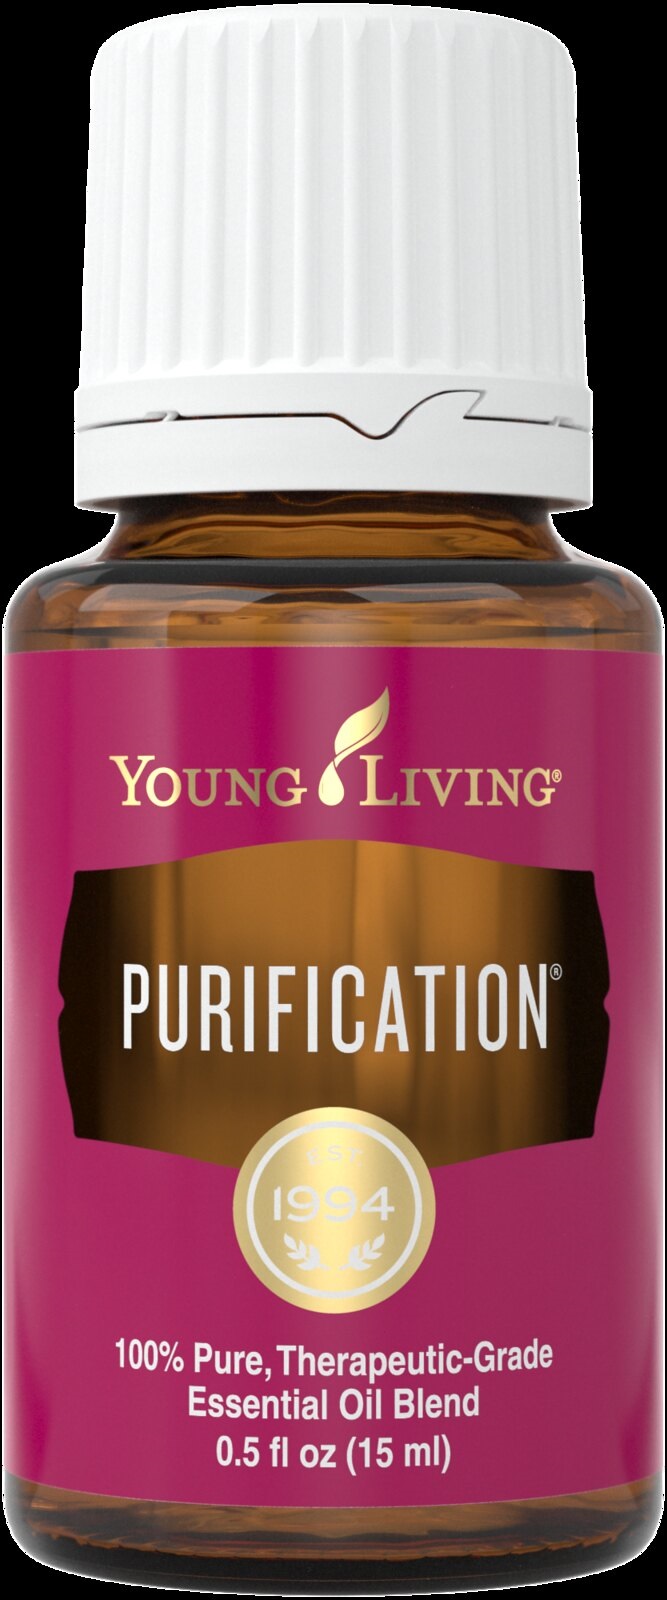 A bottle of Young Living’s Purification essential oil blend, which includes Lavandin.